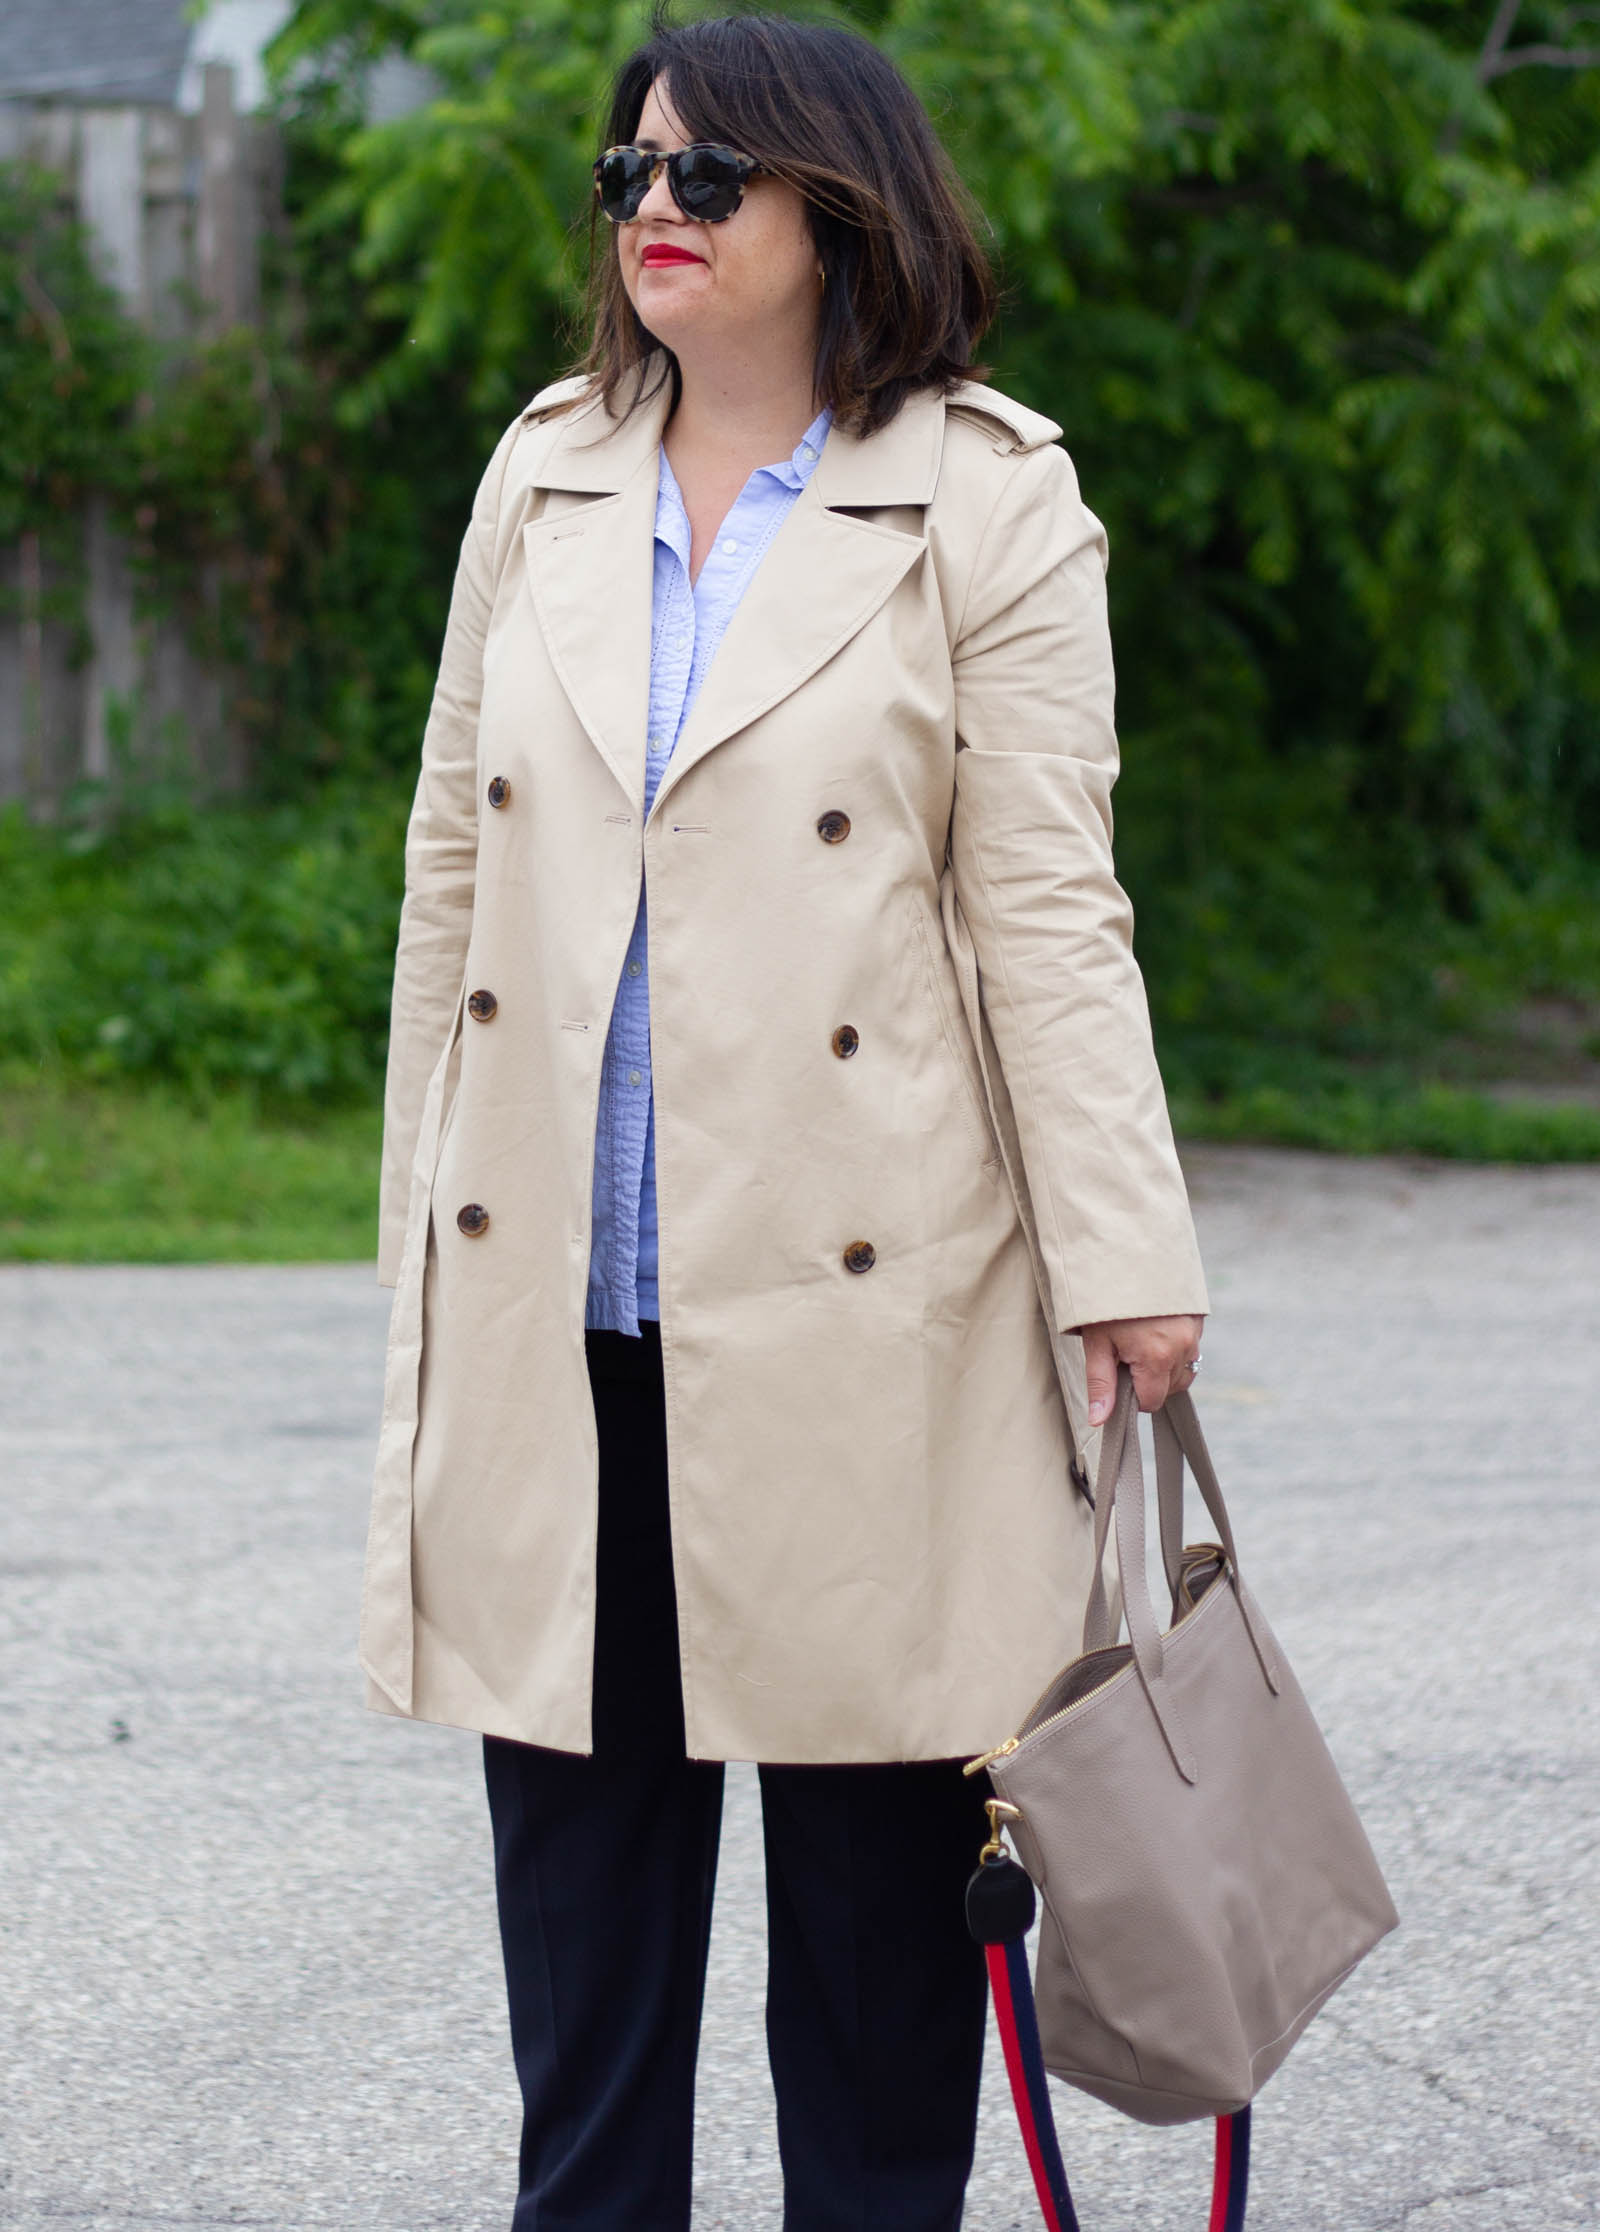 Spring Trench Coat outfit